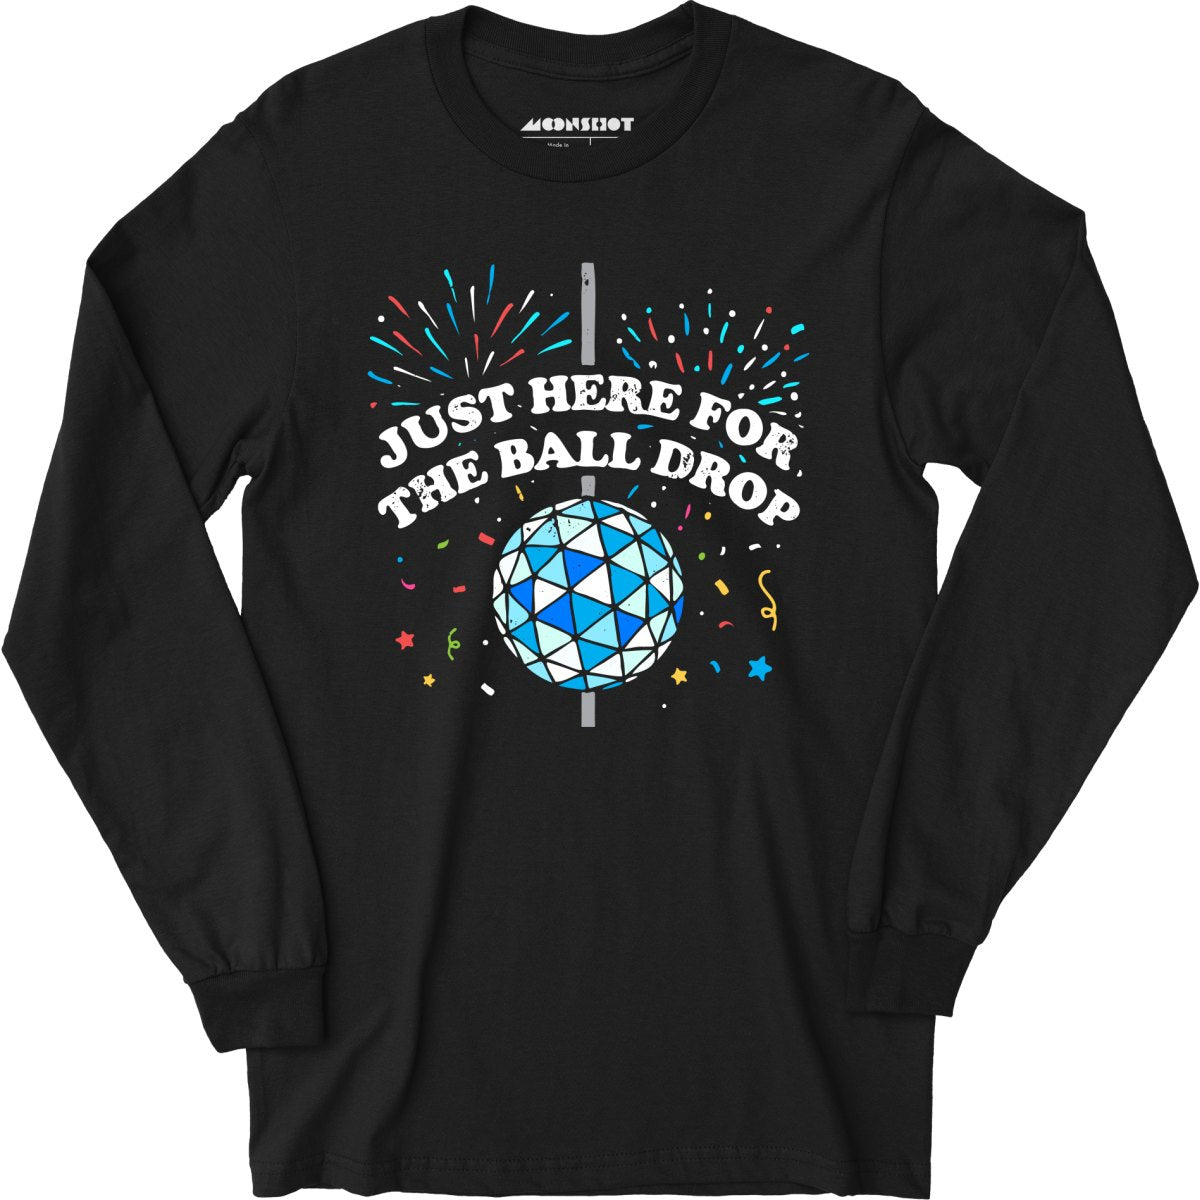 Just Here for The Ball Drop - Long Sleeve T-Shirt